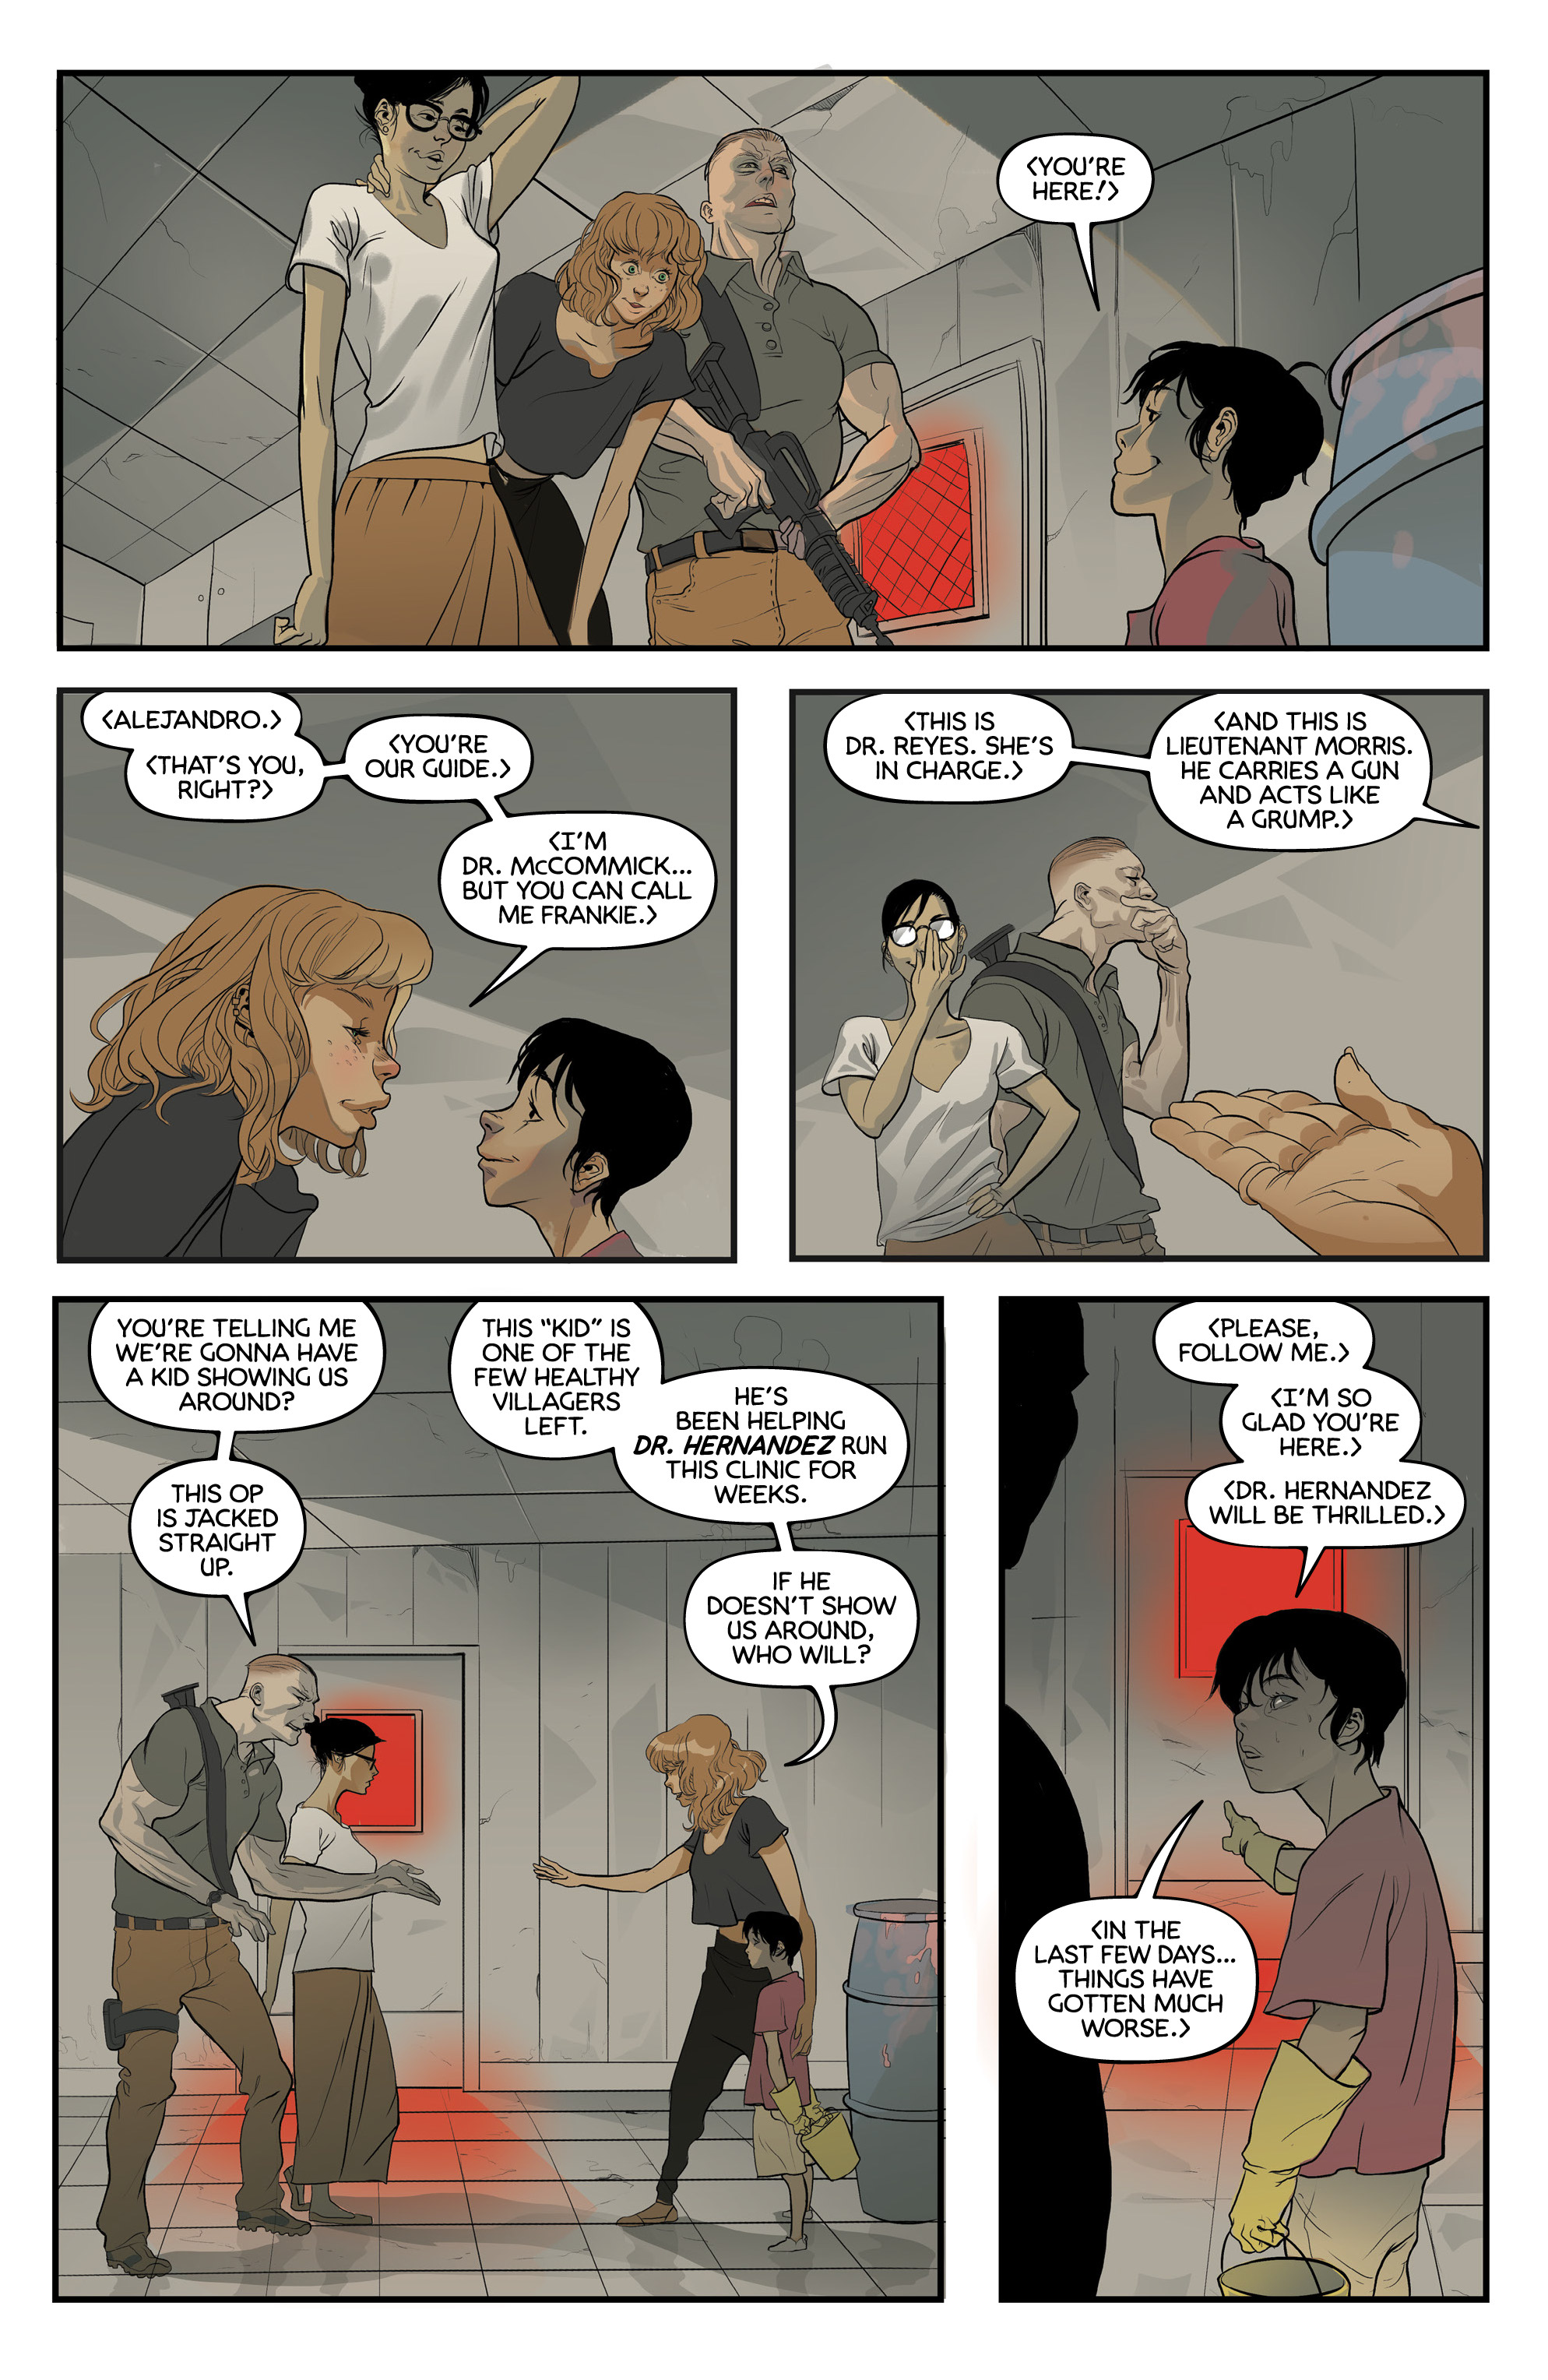 Unearth (2019-): Chapter 1 - Page 4